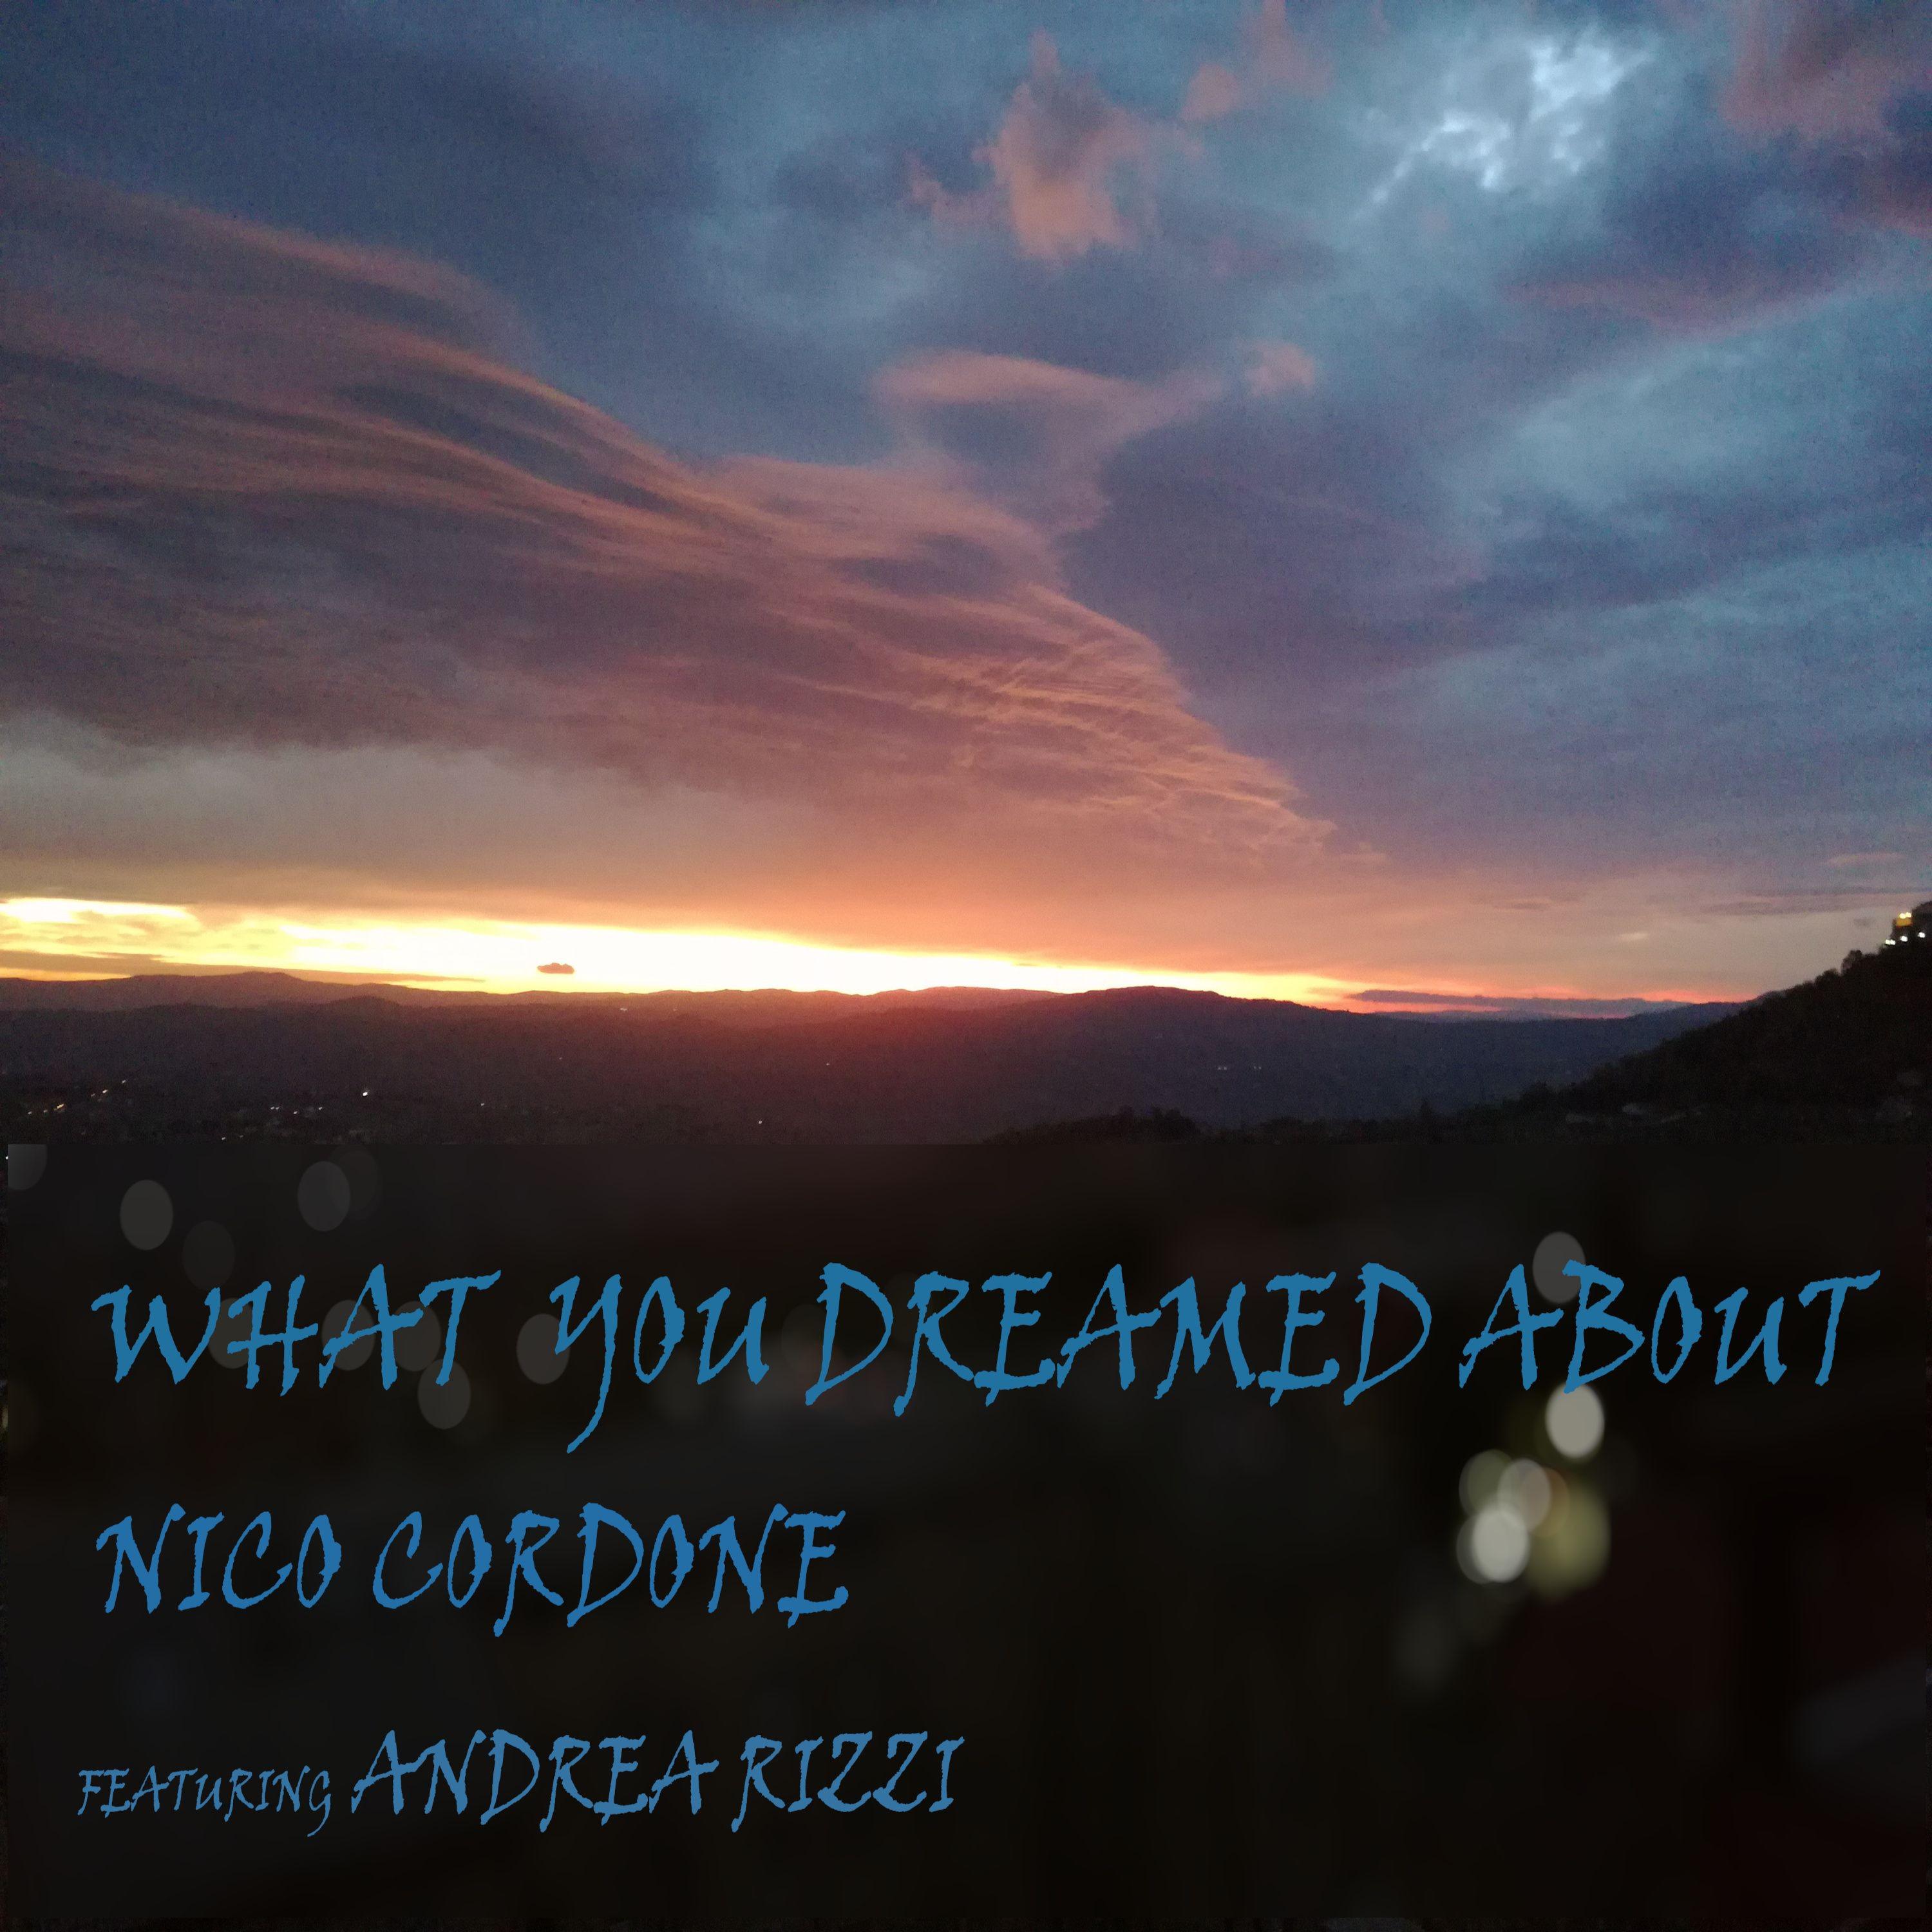 Nico Cordone - What You Dreamed About (Original Mix)